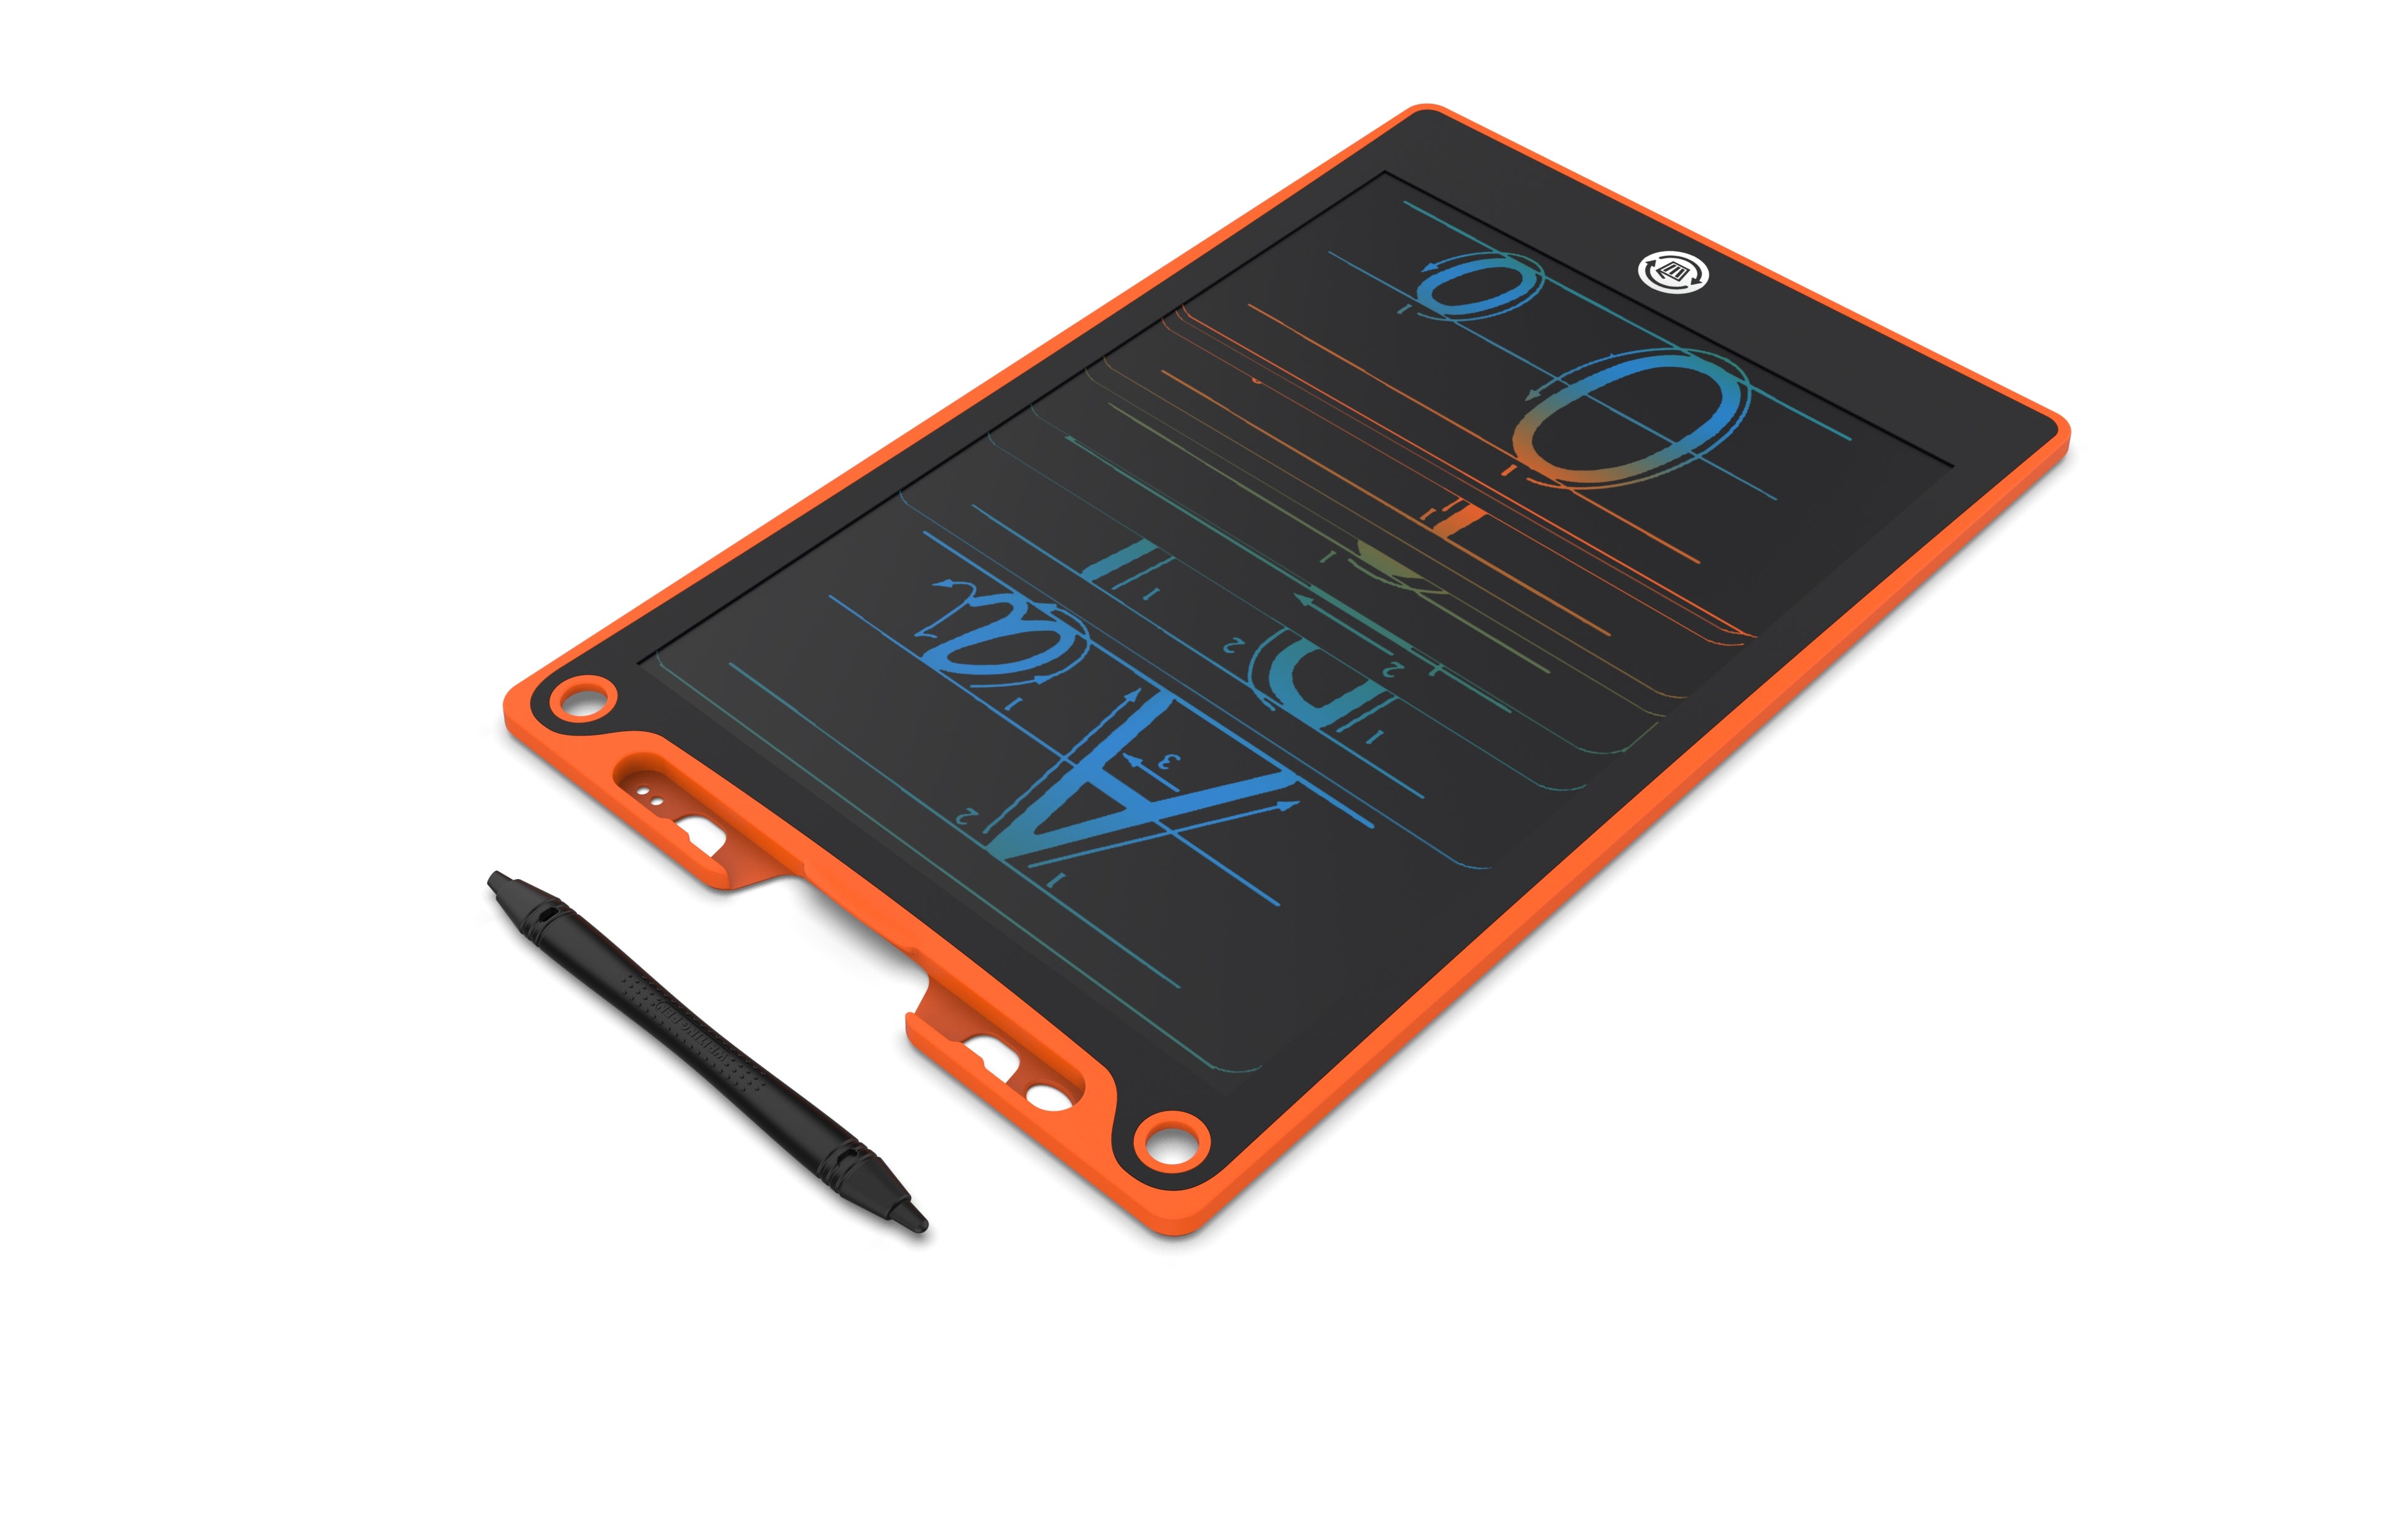 "Drag Cat" 12" Baby Graffiti Painting & Writing Drawing Board - LCD Electronic with No Blue Light LED Screen